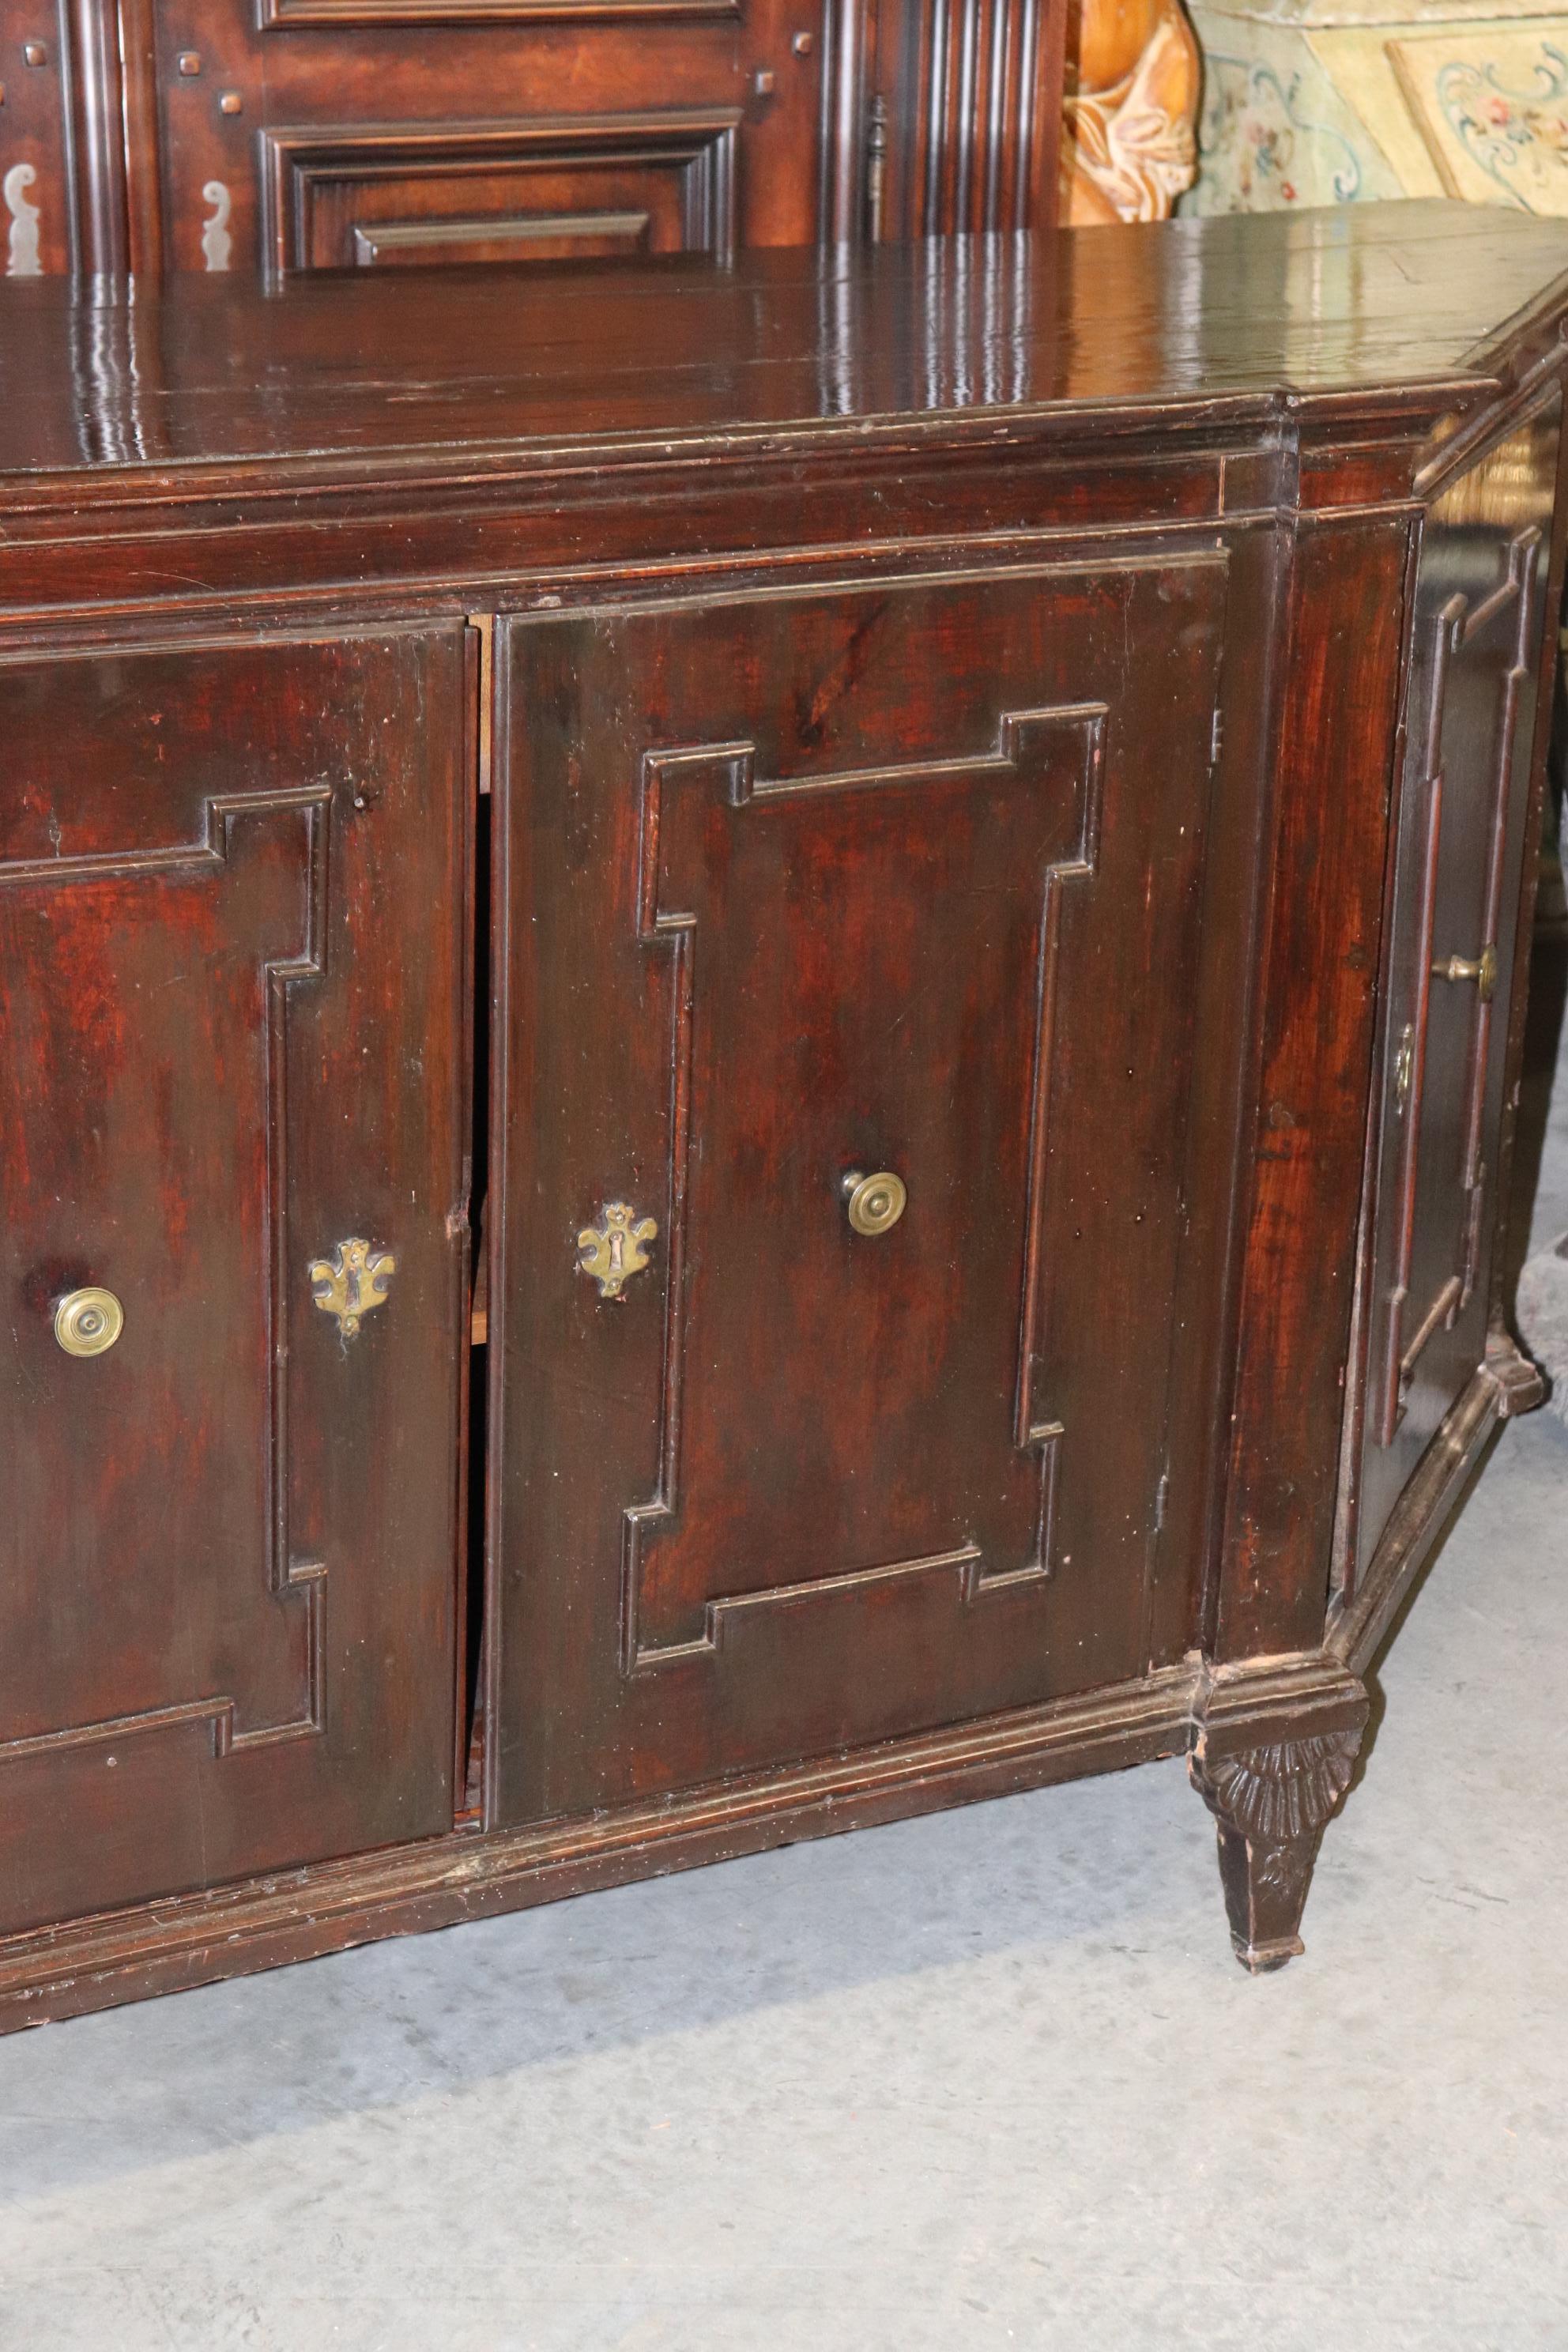 Rare Period French 1790s era Directoire Mahogany Sideboard Buffet For Sale 1